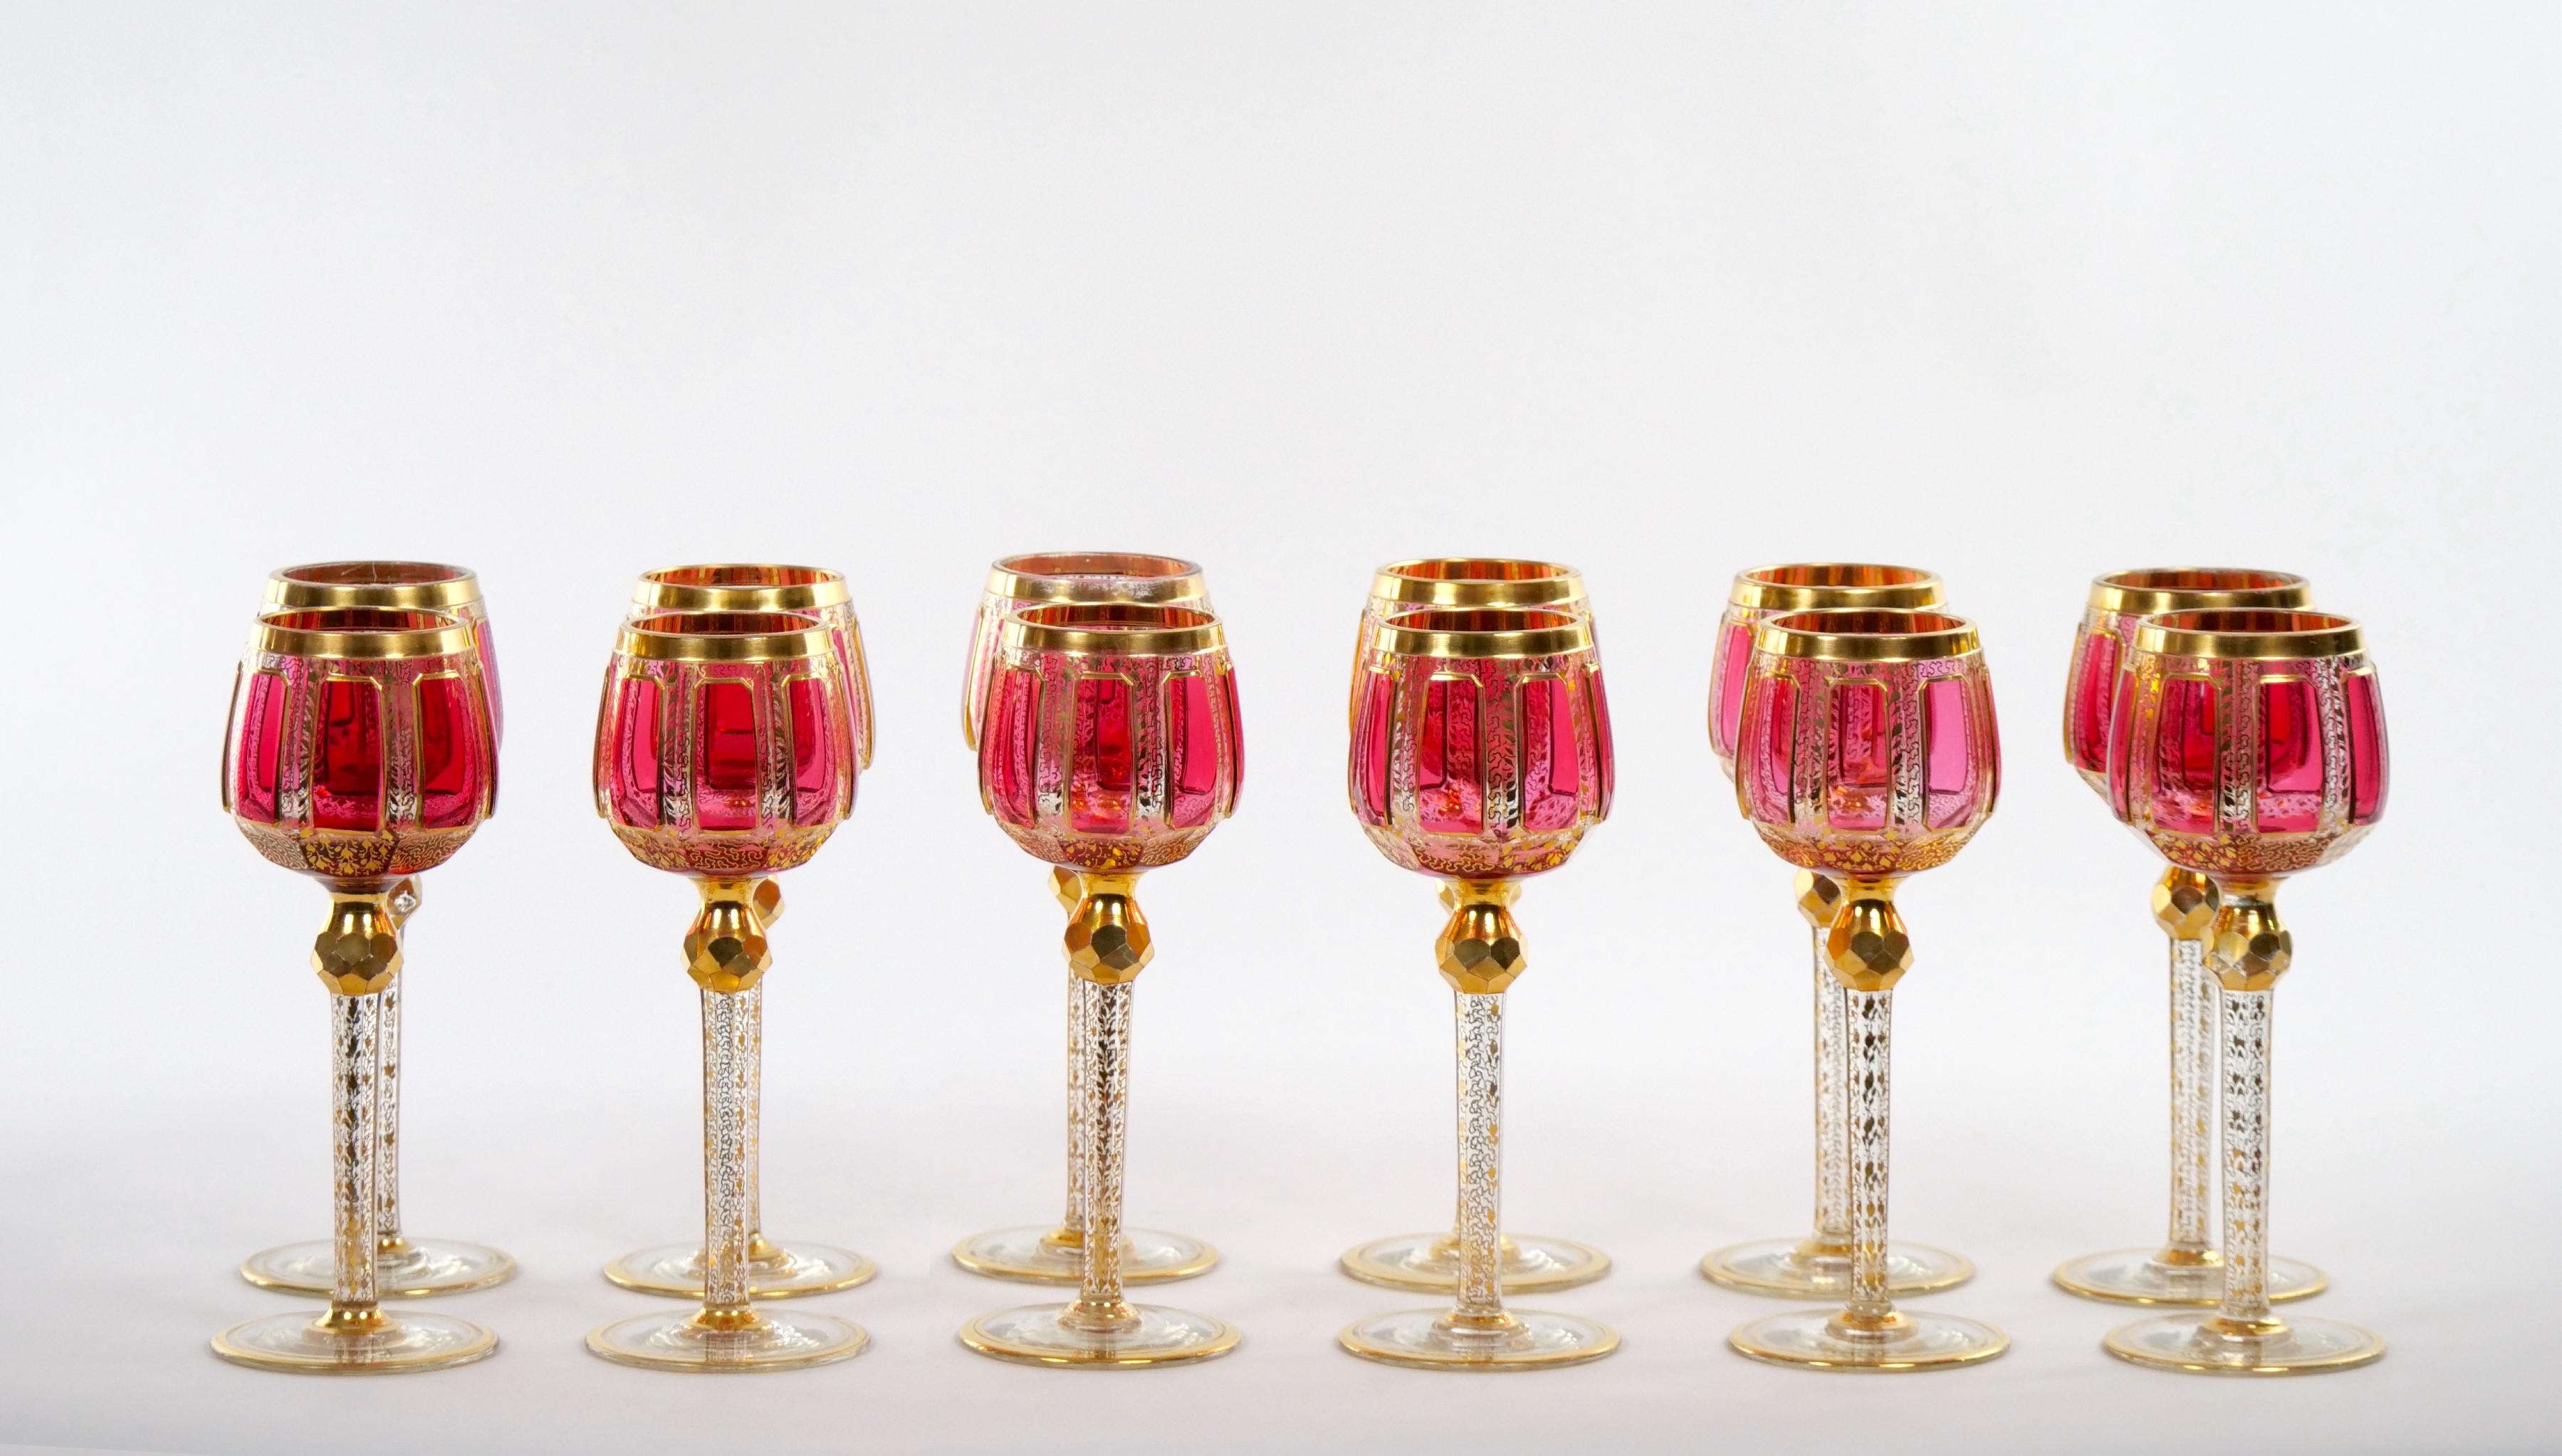 Exquisite Moser cut crystal pink paneled hand decorated design tableware / barware wine goblet service for 12 people. Each glass features a very heavy gilt gold and enameled pink paneled with heavy gilt gold trim top standing on a long yet very